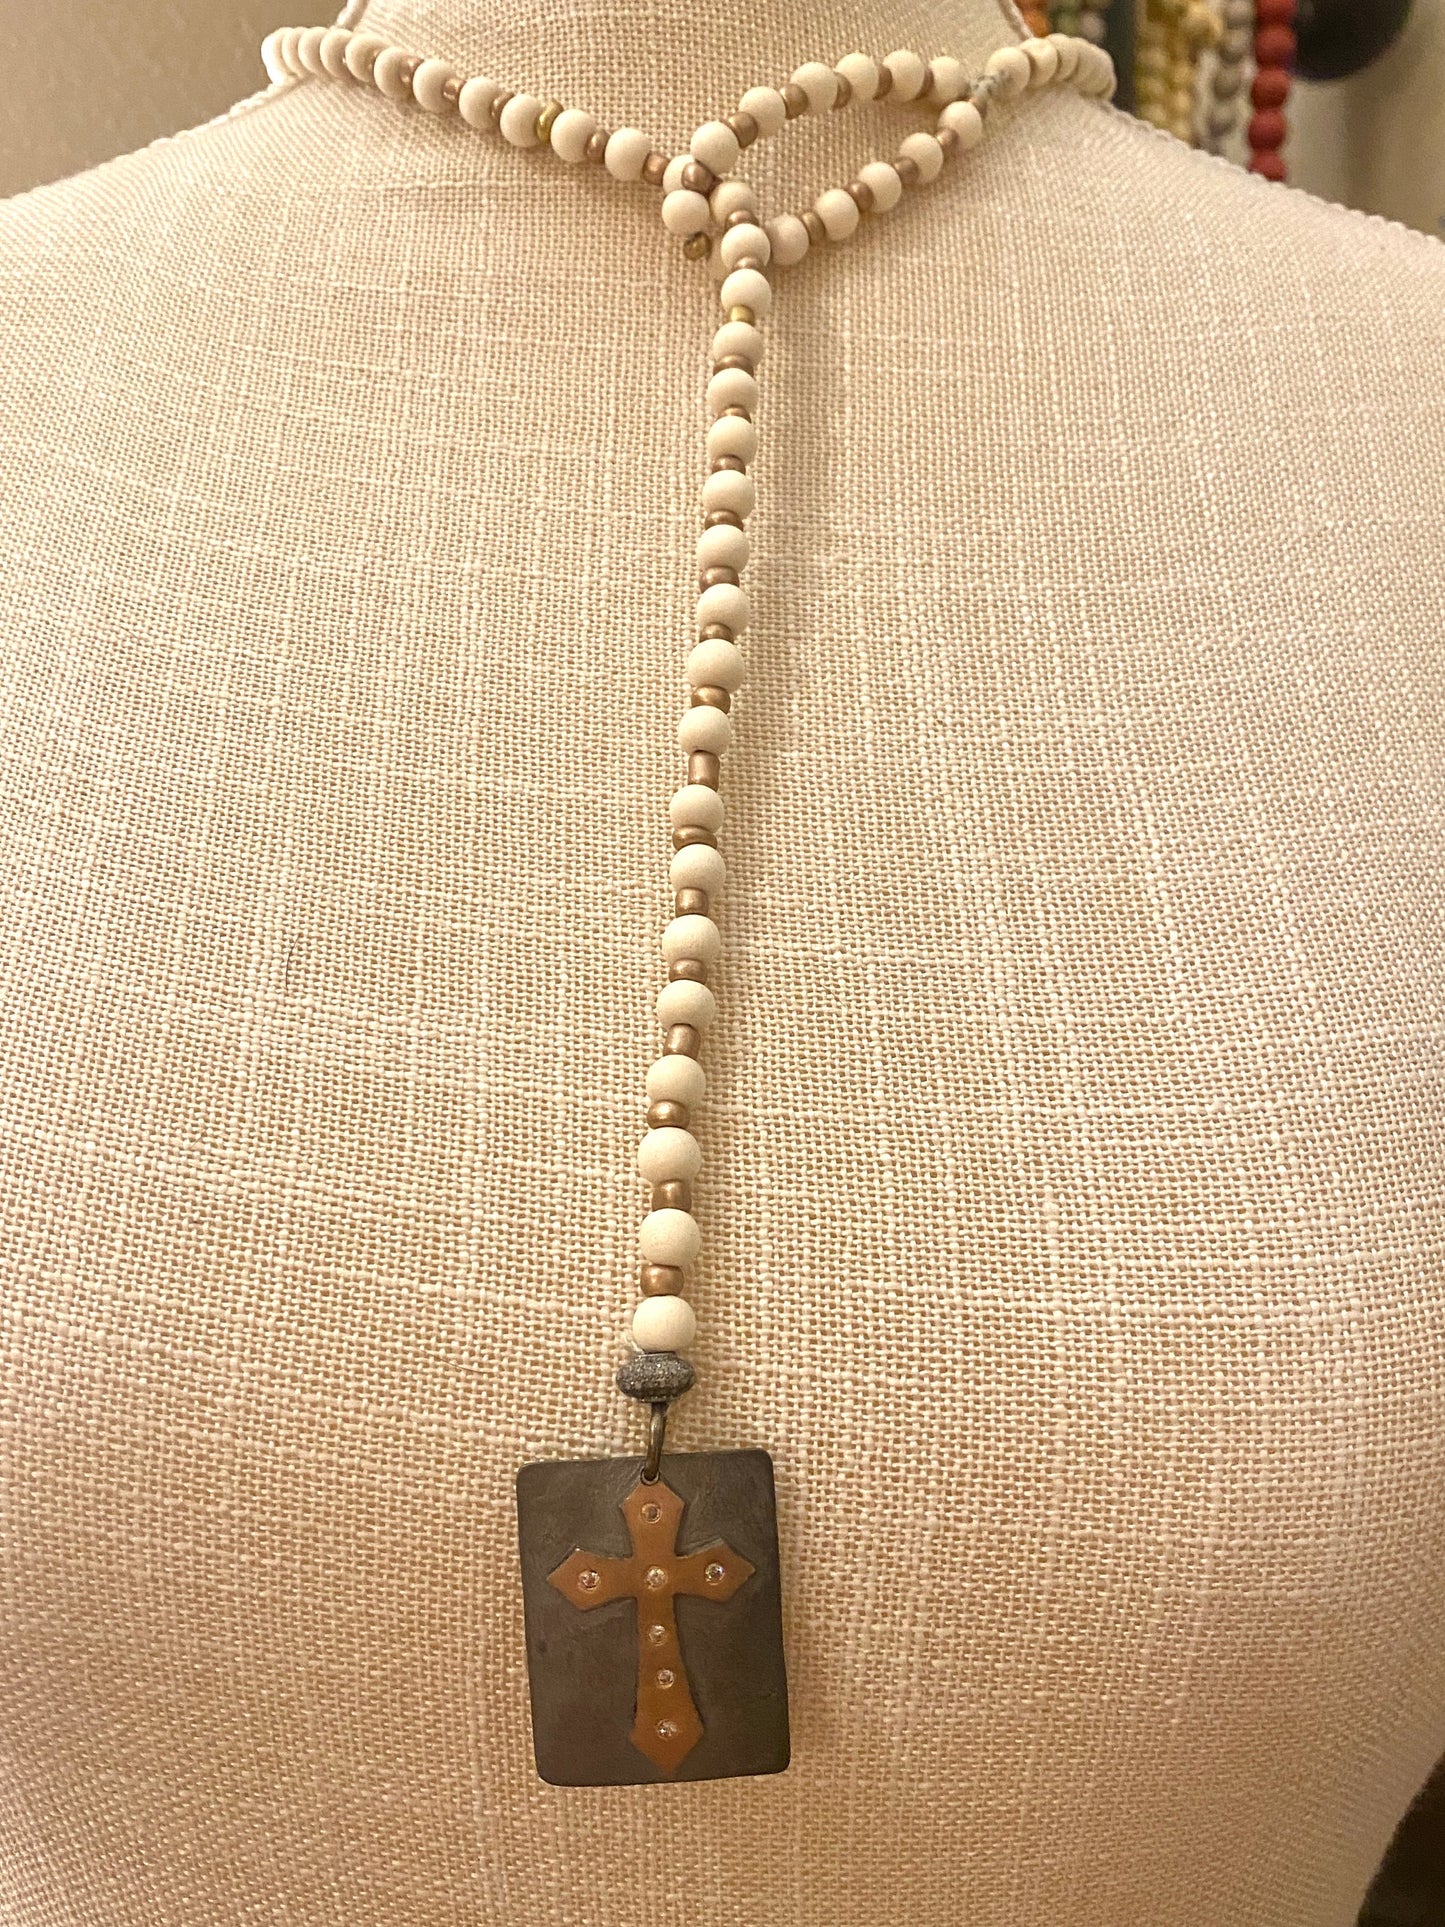 Ivory Wooden Beaded Lariat Necklace with Metallic Seed Beads and Metallic and Diamond Cross Pendant with